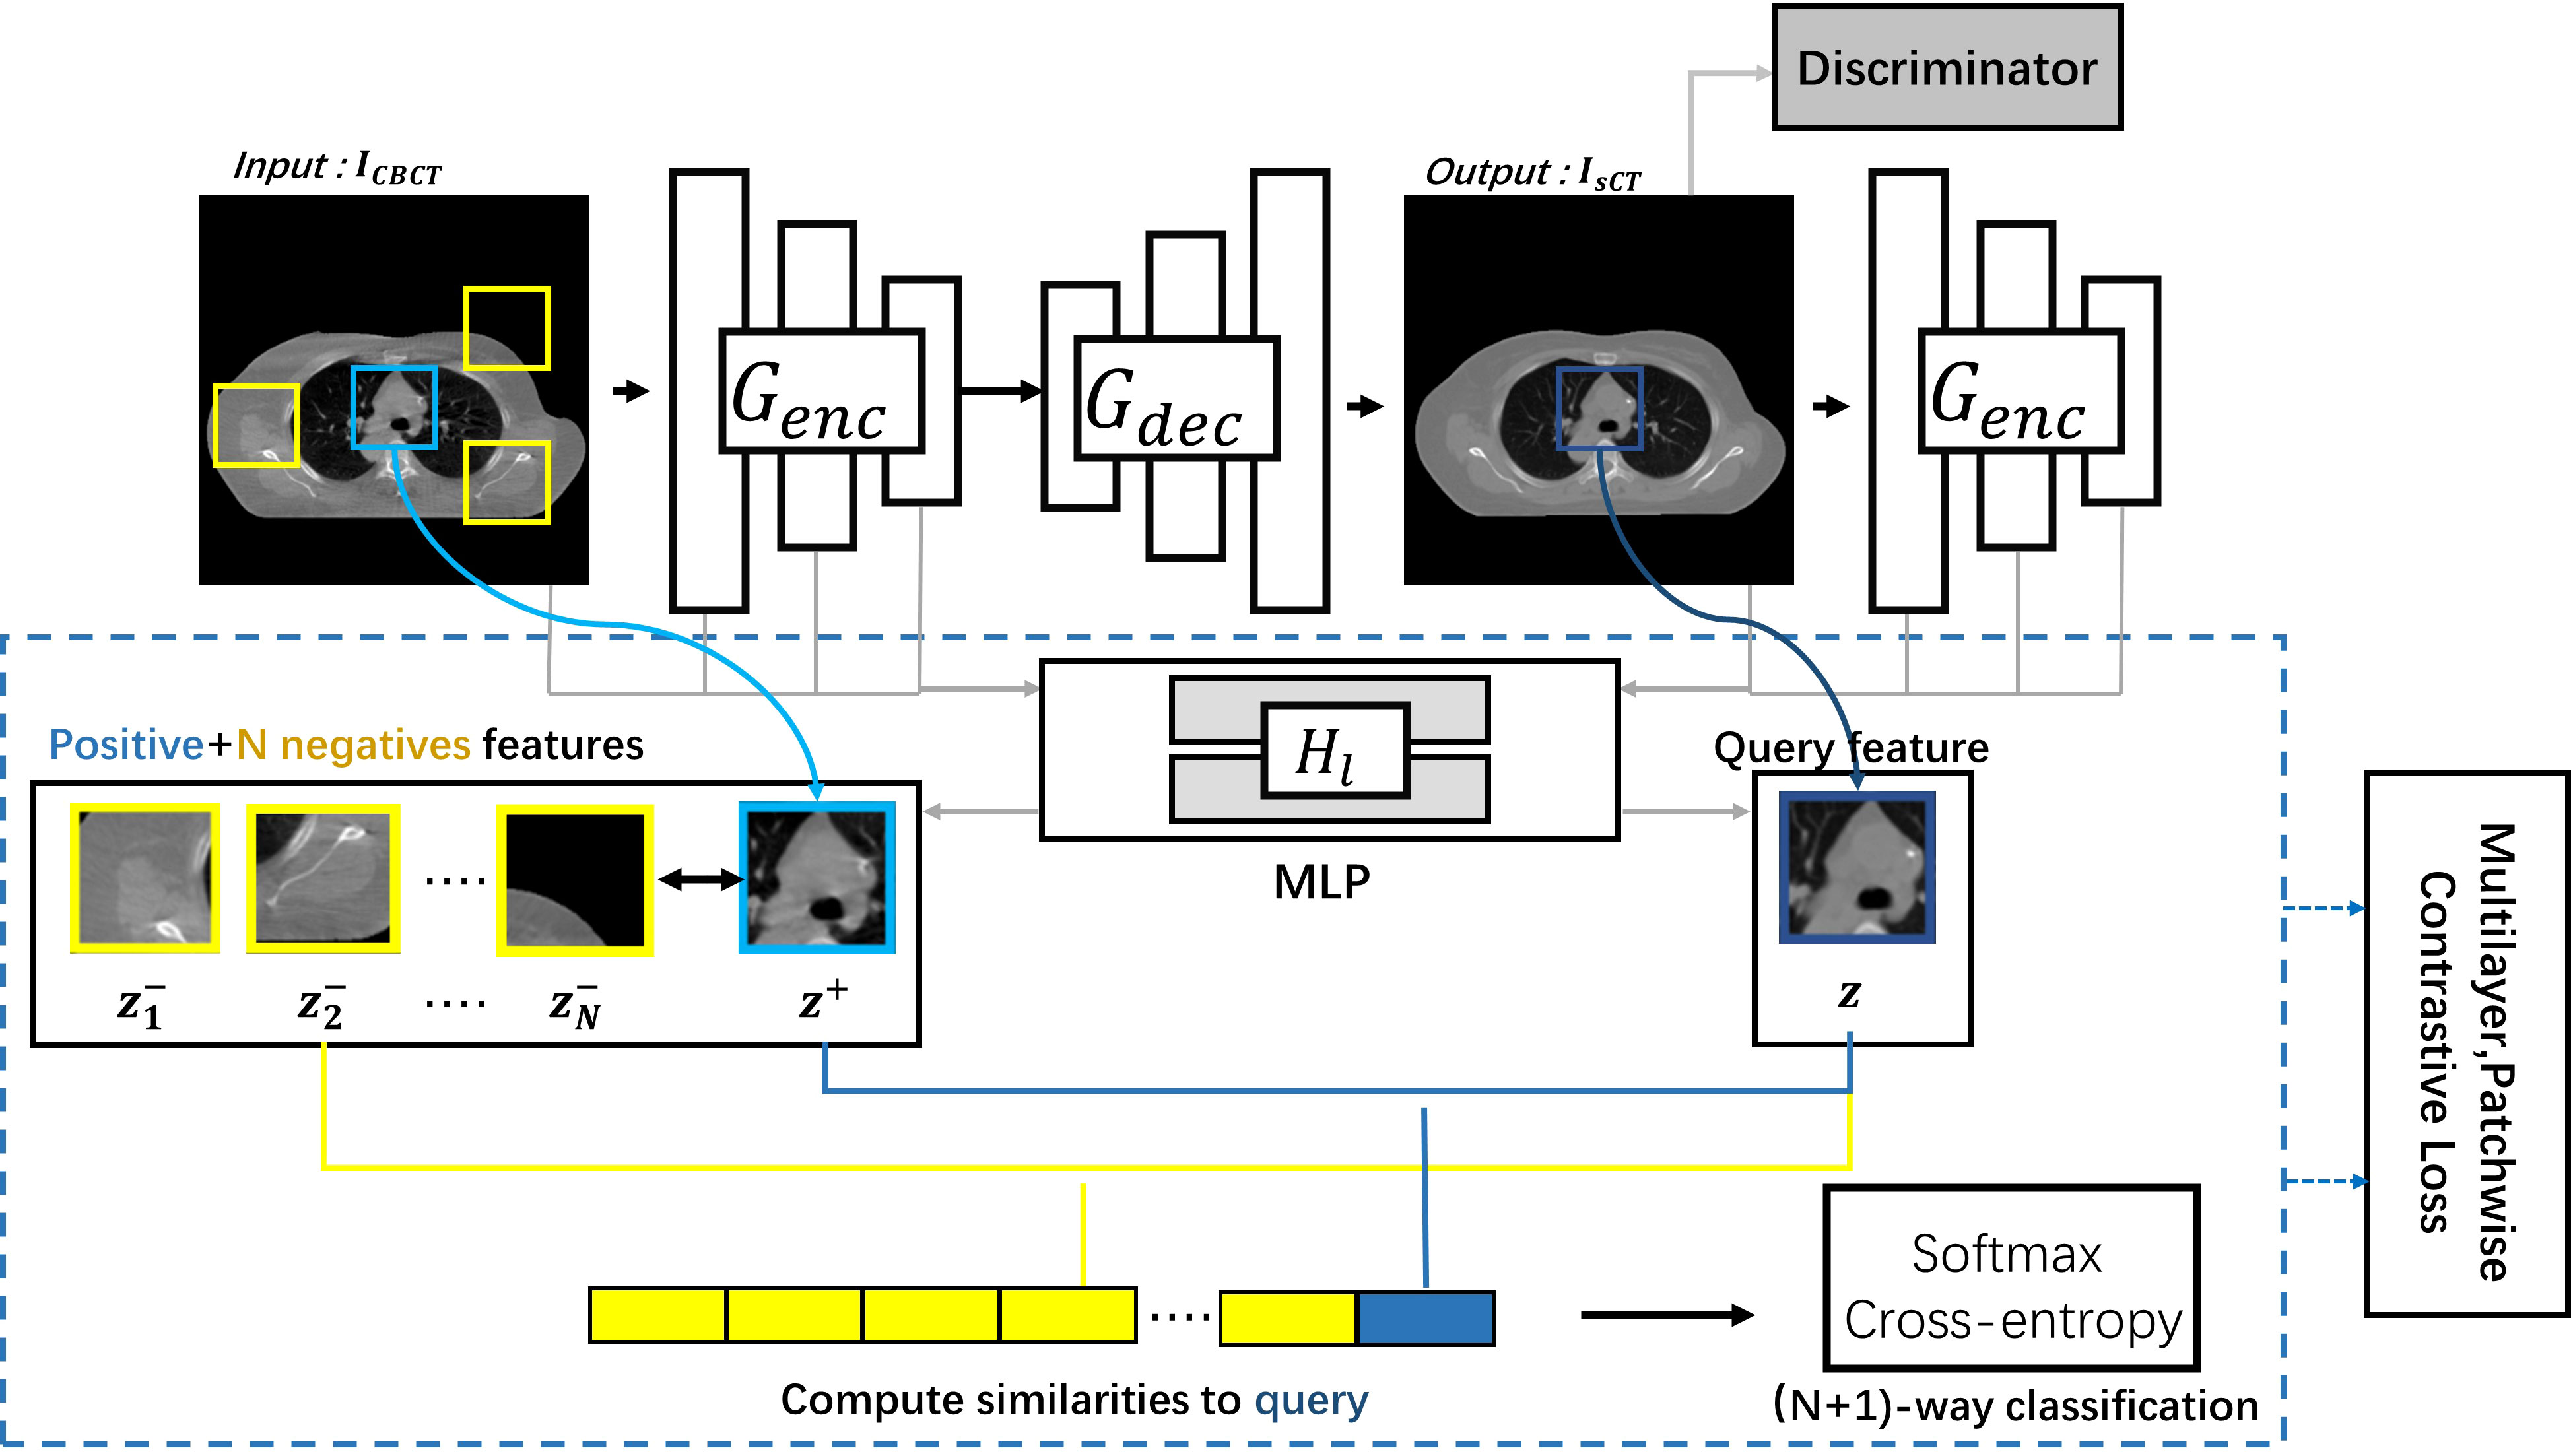 Synthetic CT generation from cone-beam CT using deep-learning for breast  adaptive radiotherapy - ScienceDirect